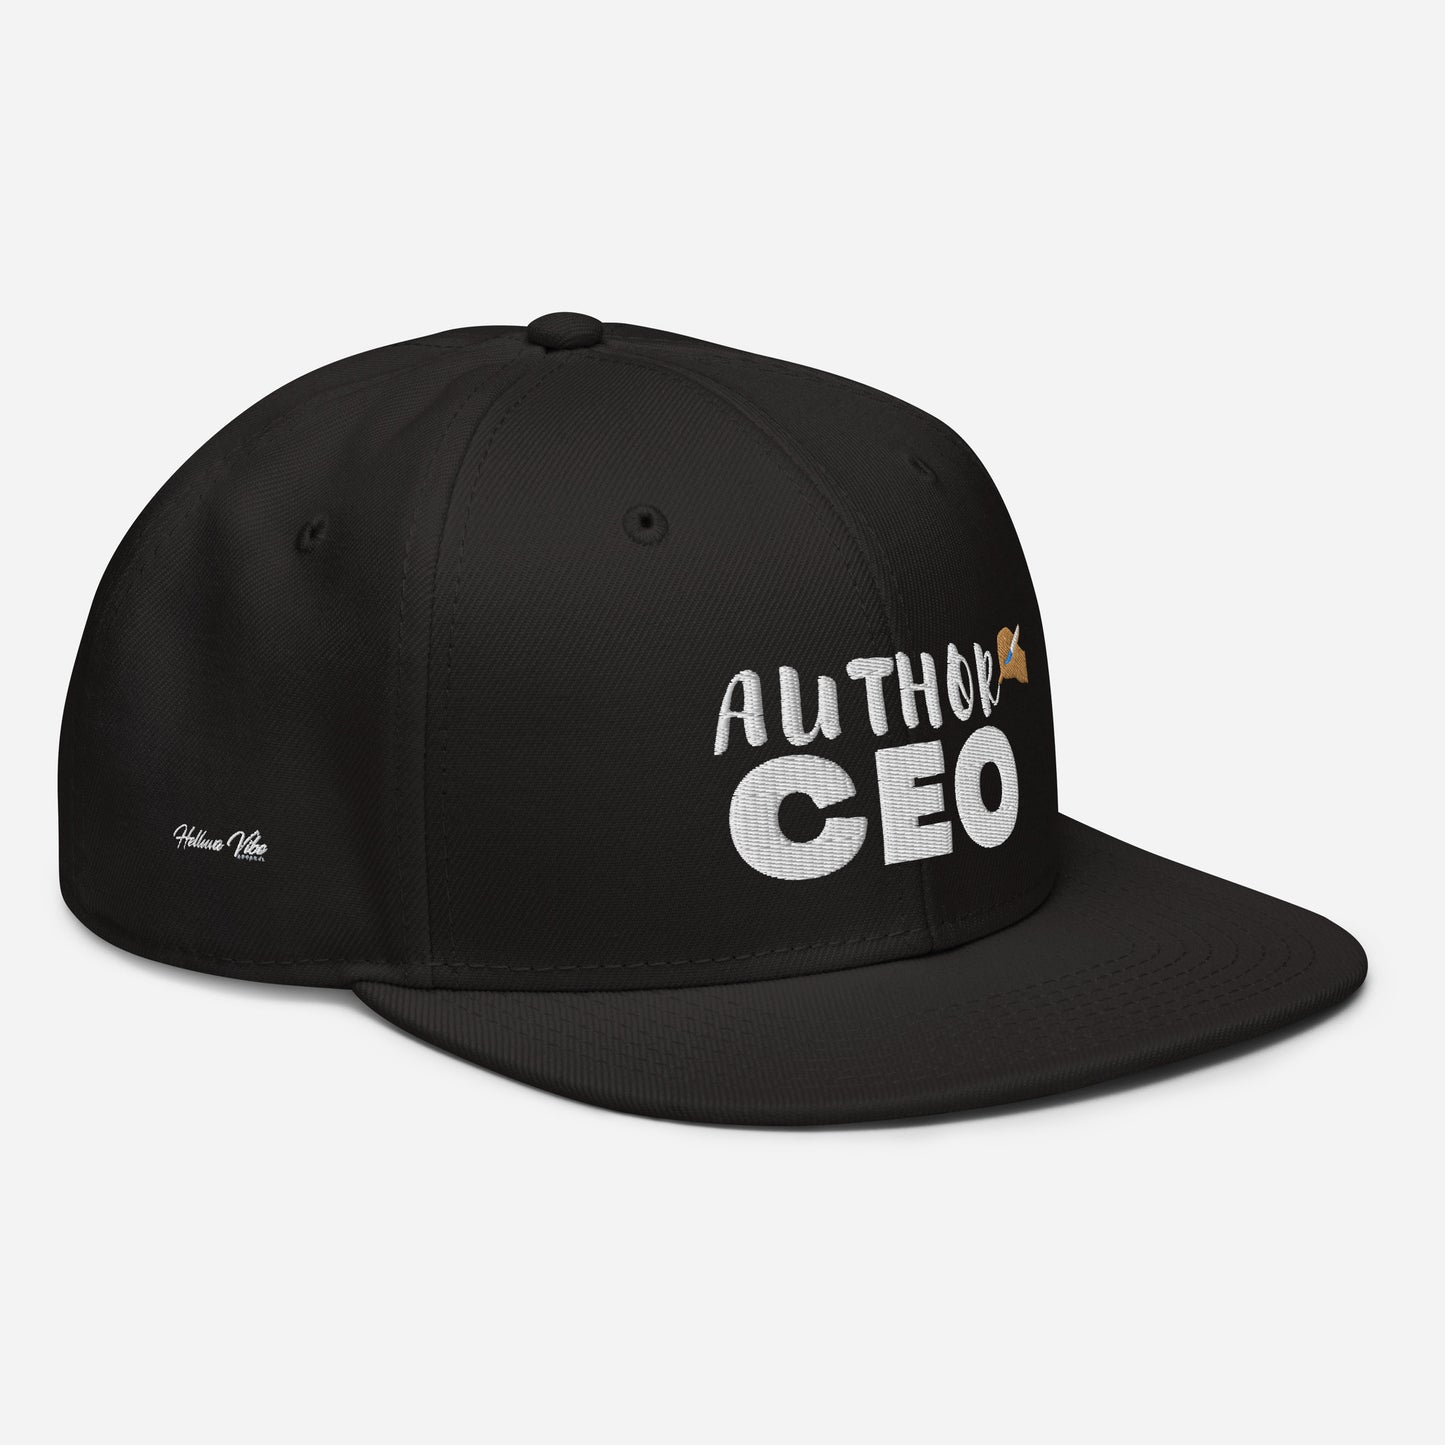 Author CEO Snapback Hat